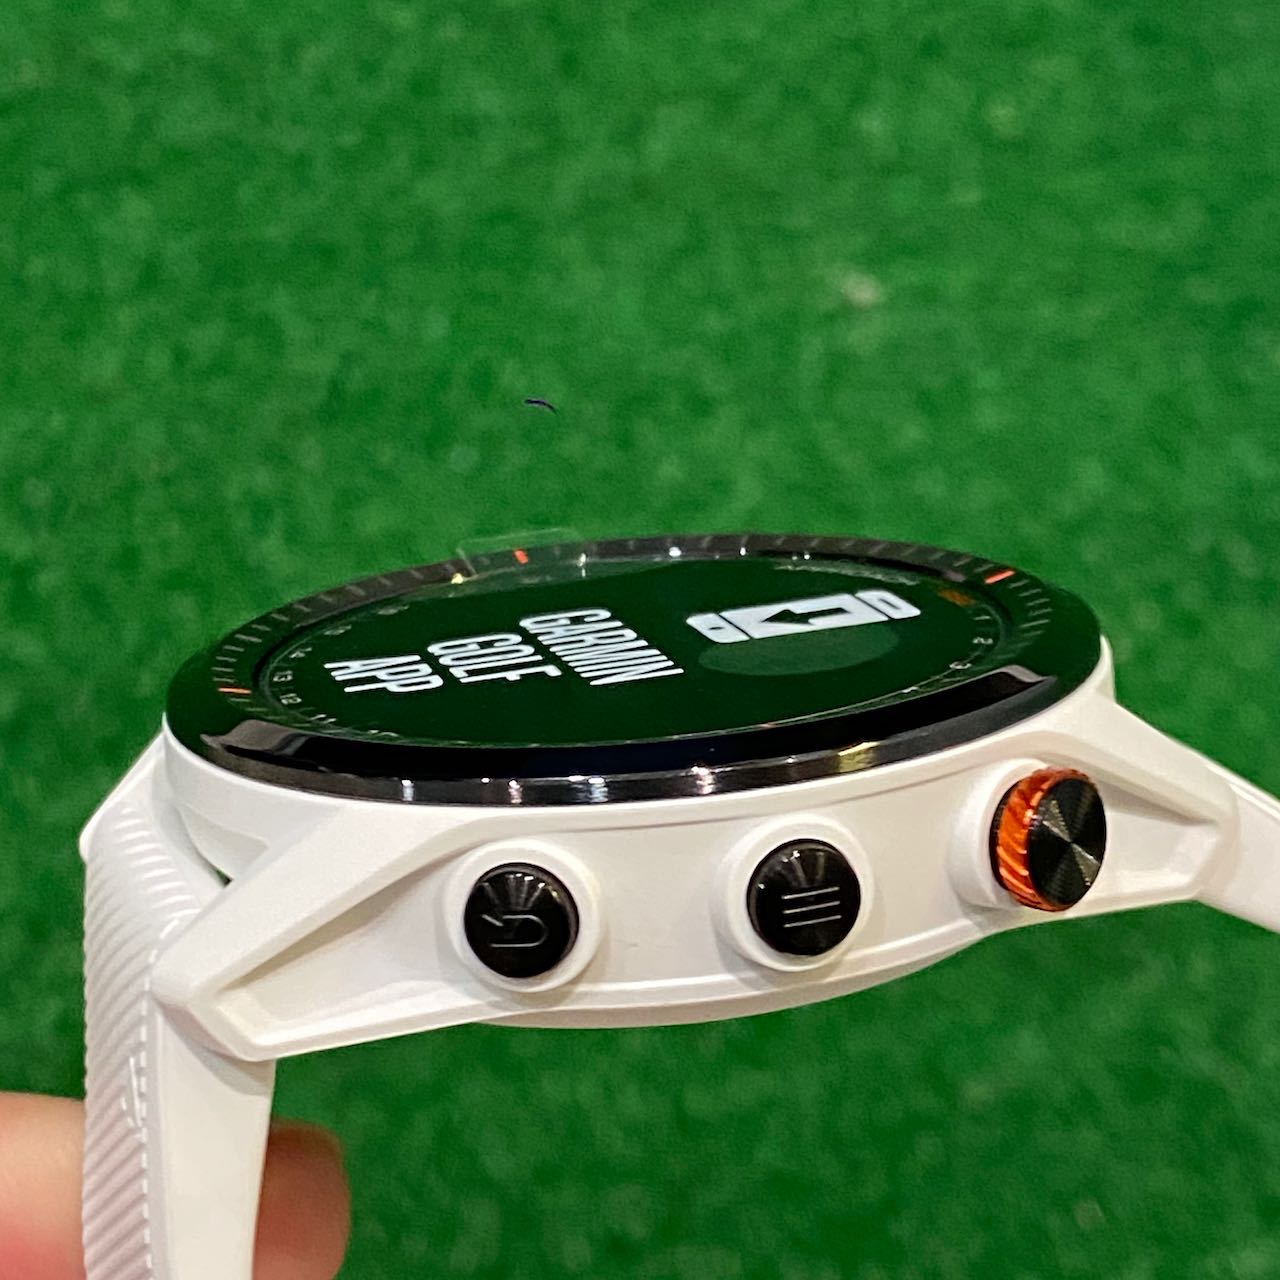 Golf Caddie on your wrist with the new Garmin Approach S62 smartwatch